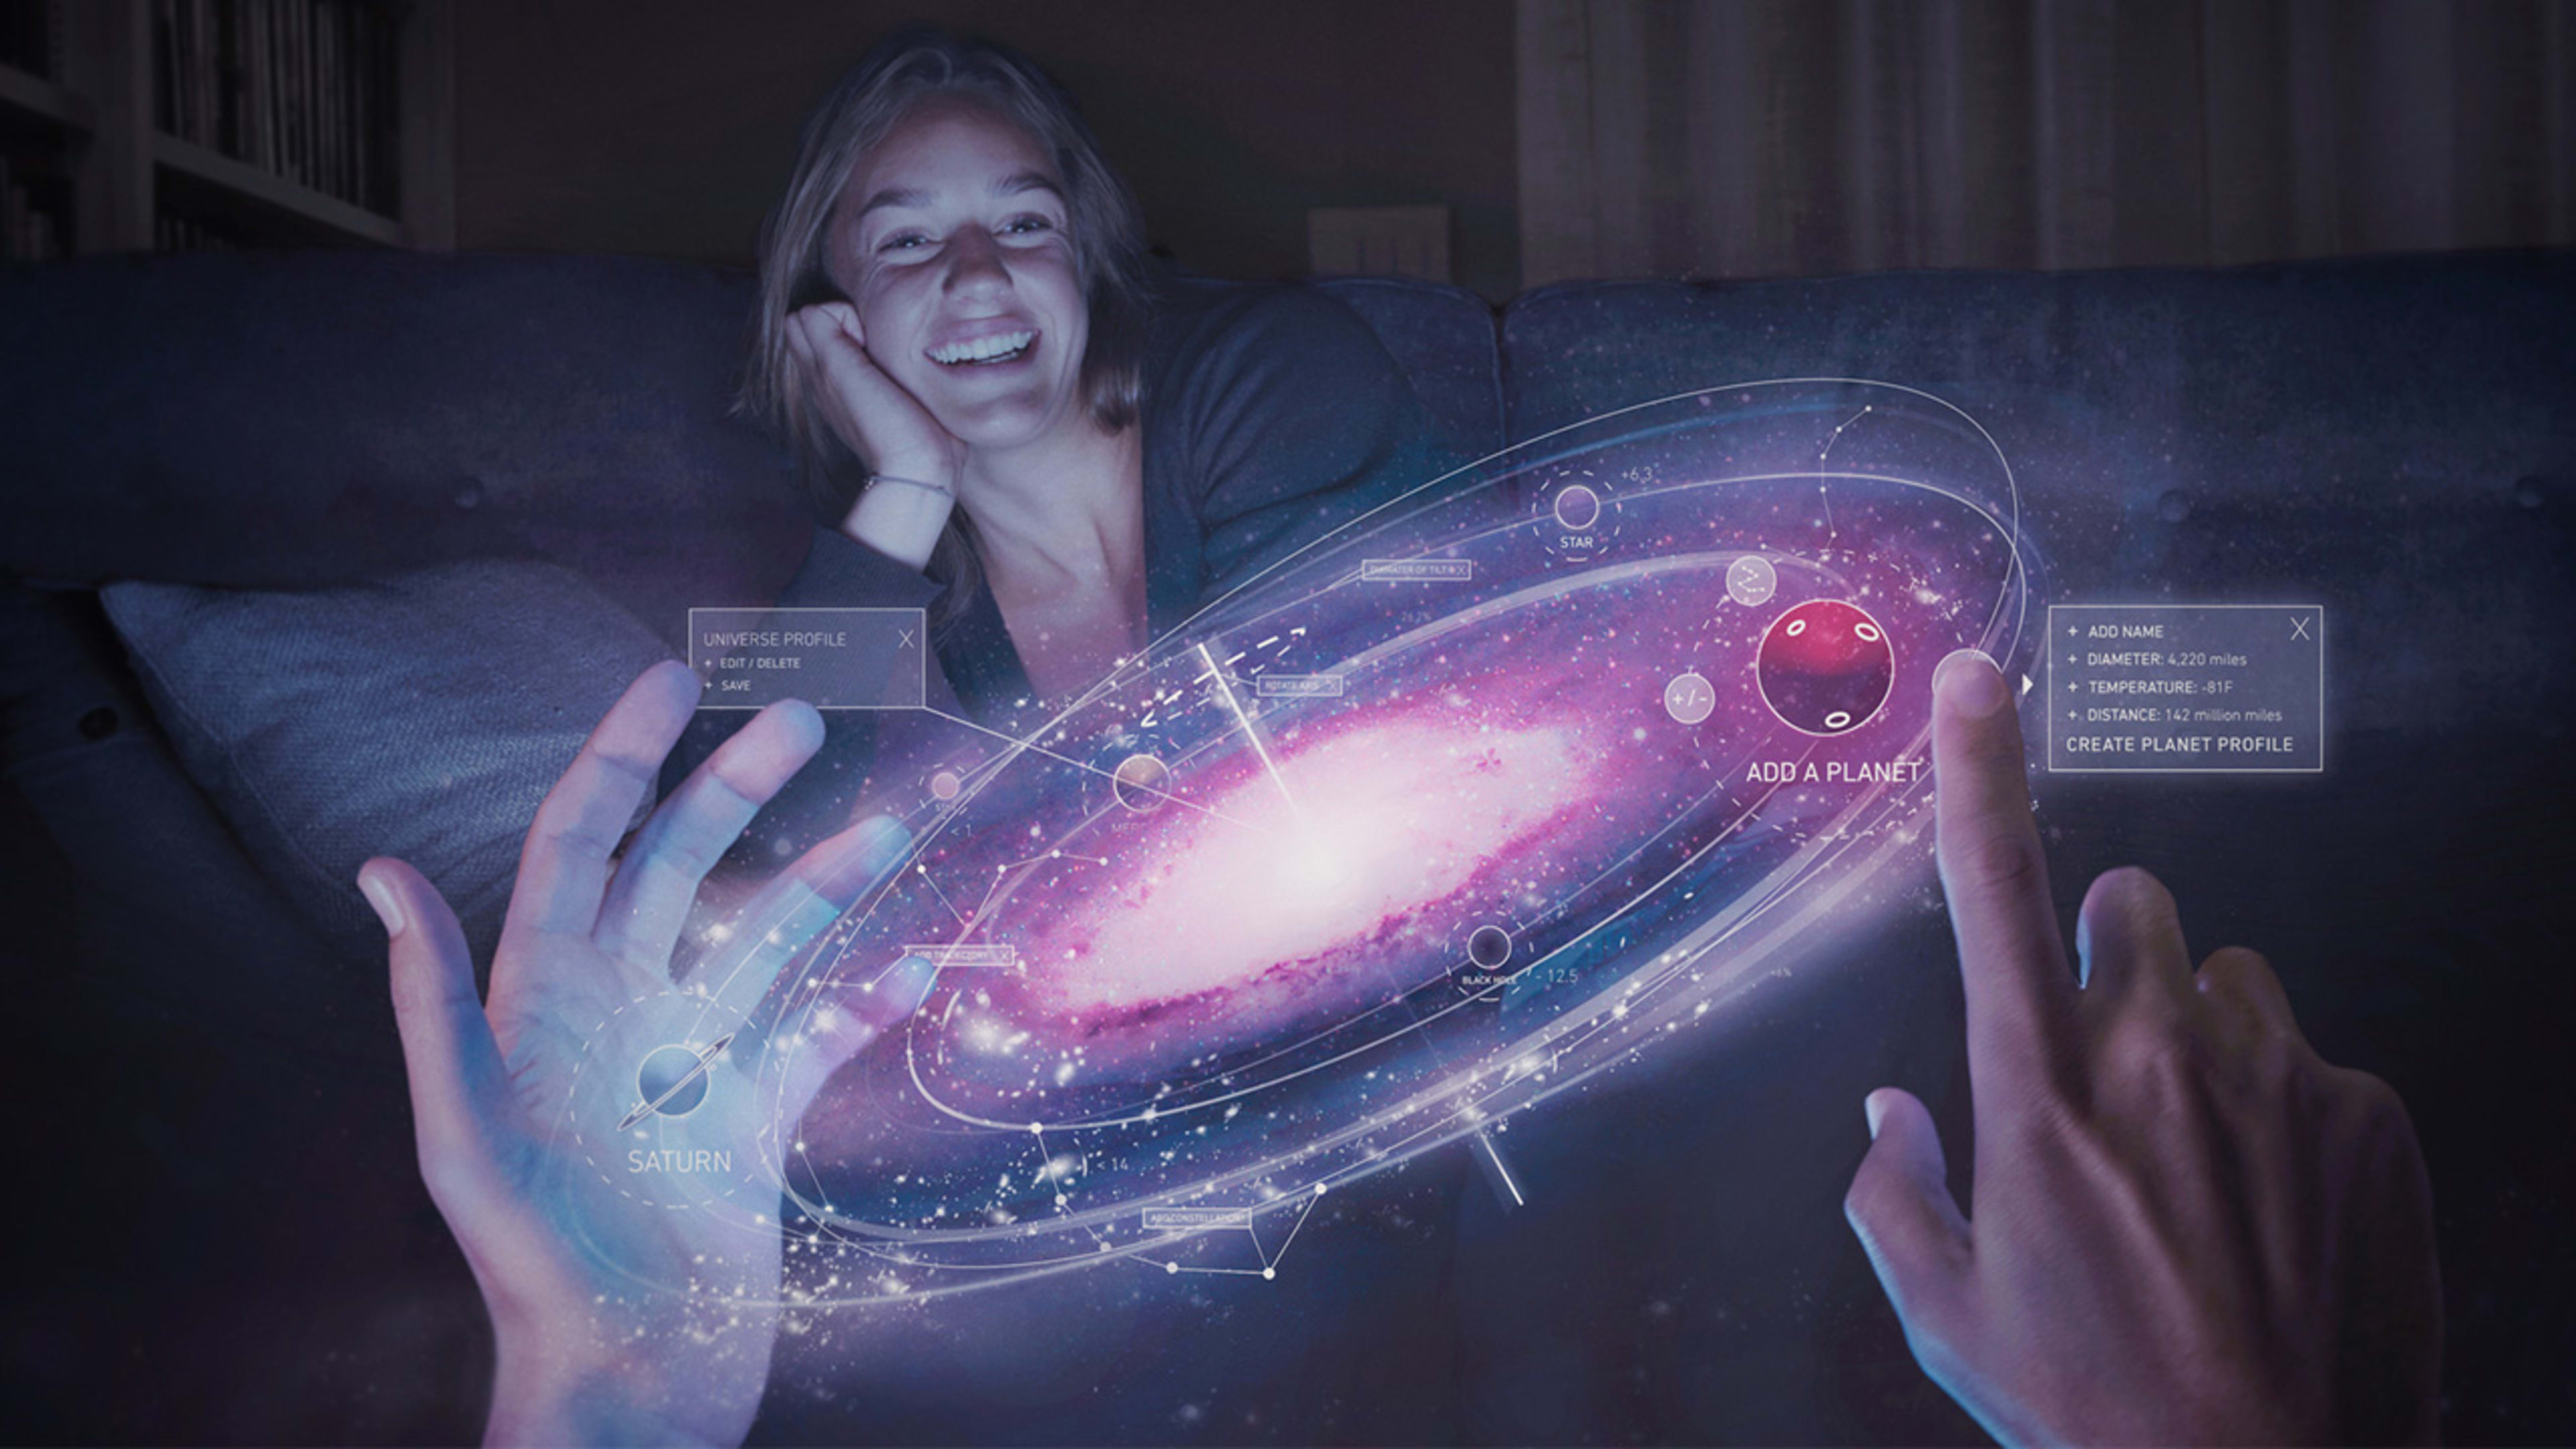 Magic Leap Scores $793.5 Million To Science The Heck Out Of “Mixed Reality Lightfield”